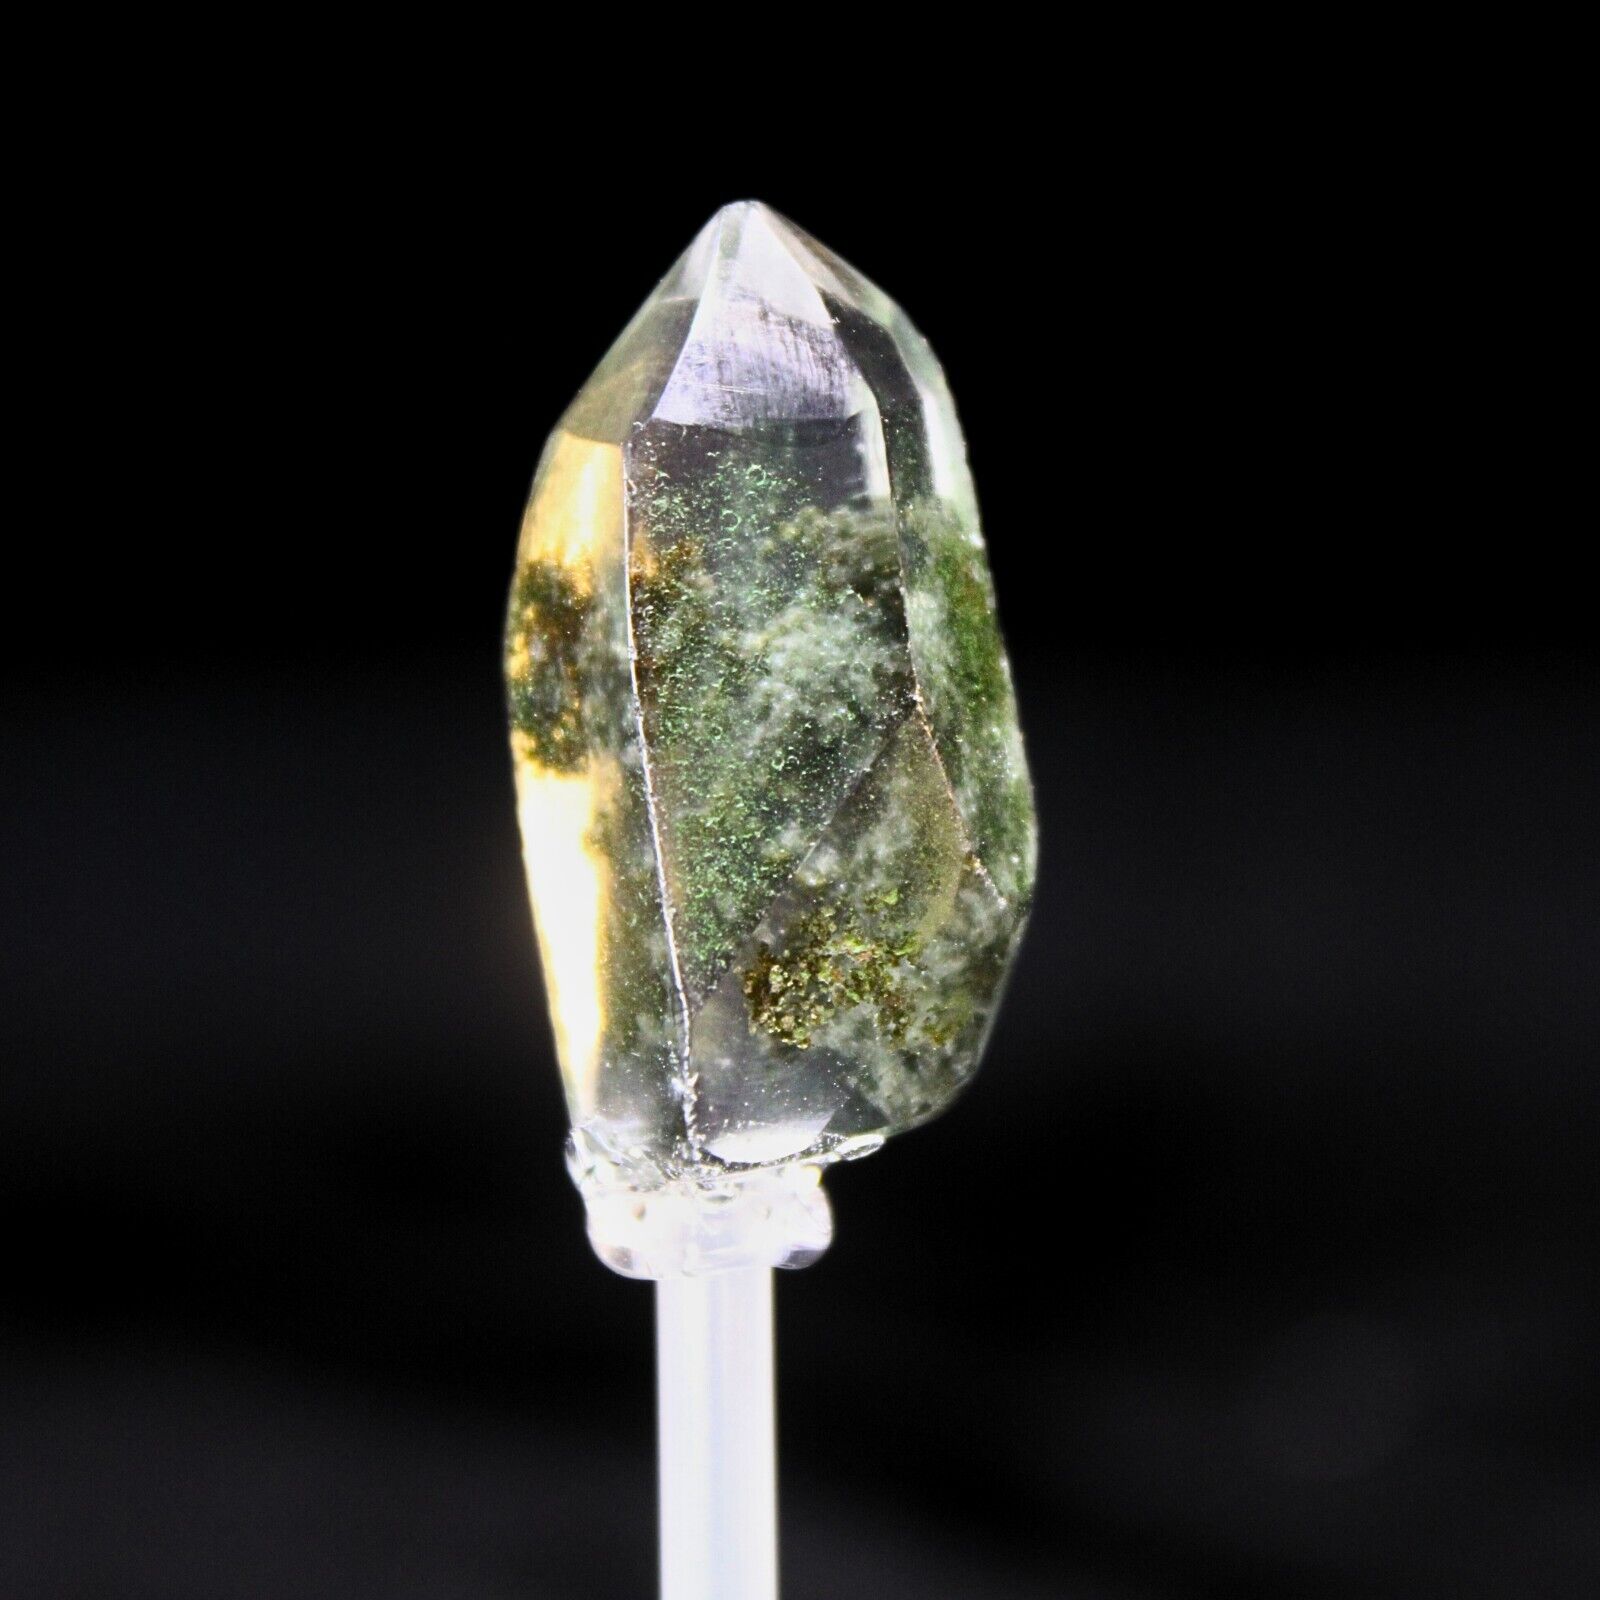 38g Green Apophyllite Crystal Stone for Healing Crysta Protection and Home Decor